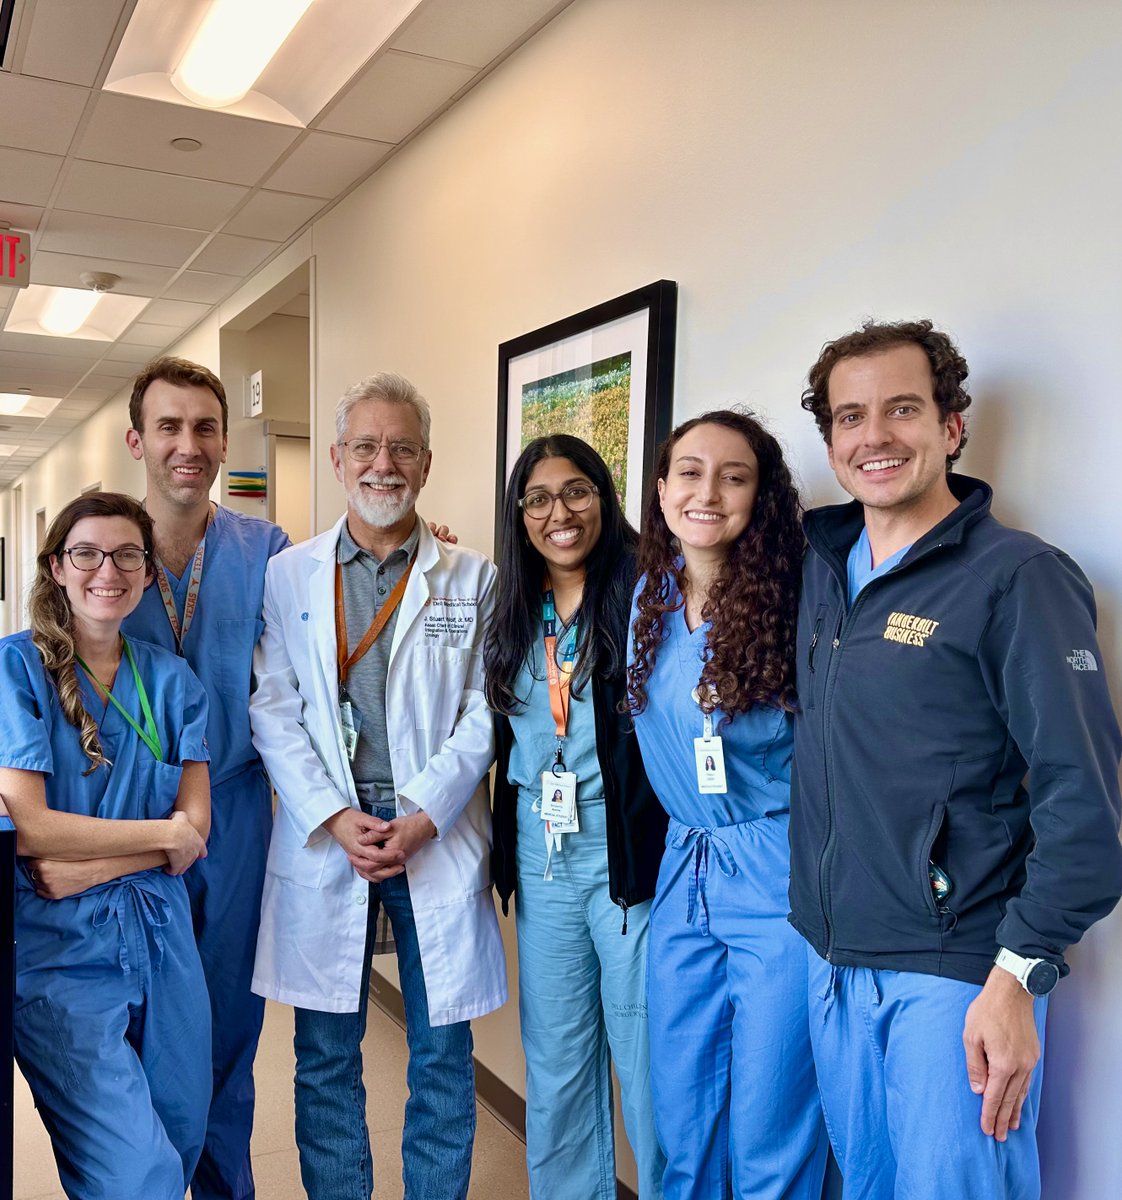 Grateful beyond words! Just finished an incredible urology rotation with the amazing team at @DellMedSchool. Huge thank you @JStuartWolf @ecosterberg, @a_laviana and Dr. Tarah Woodle for their invaluable mentorship and inspiration ❤️ #urology